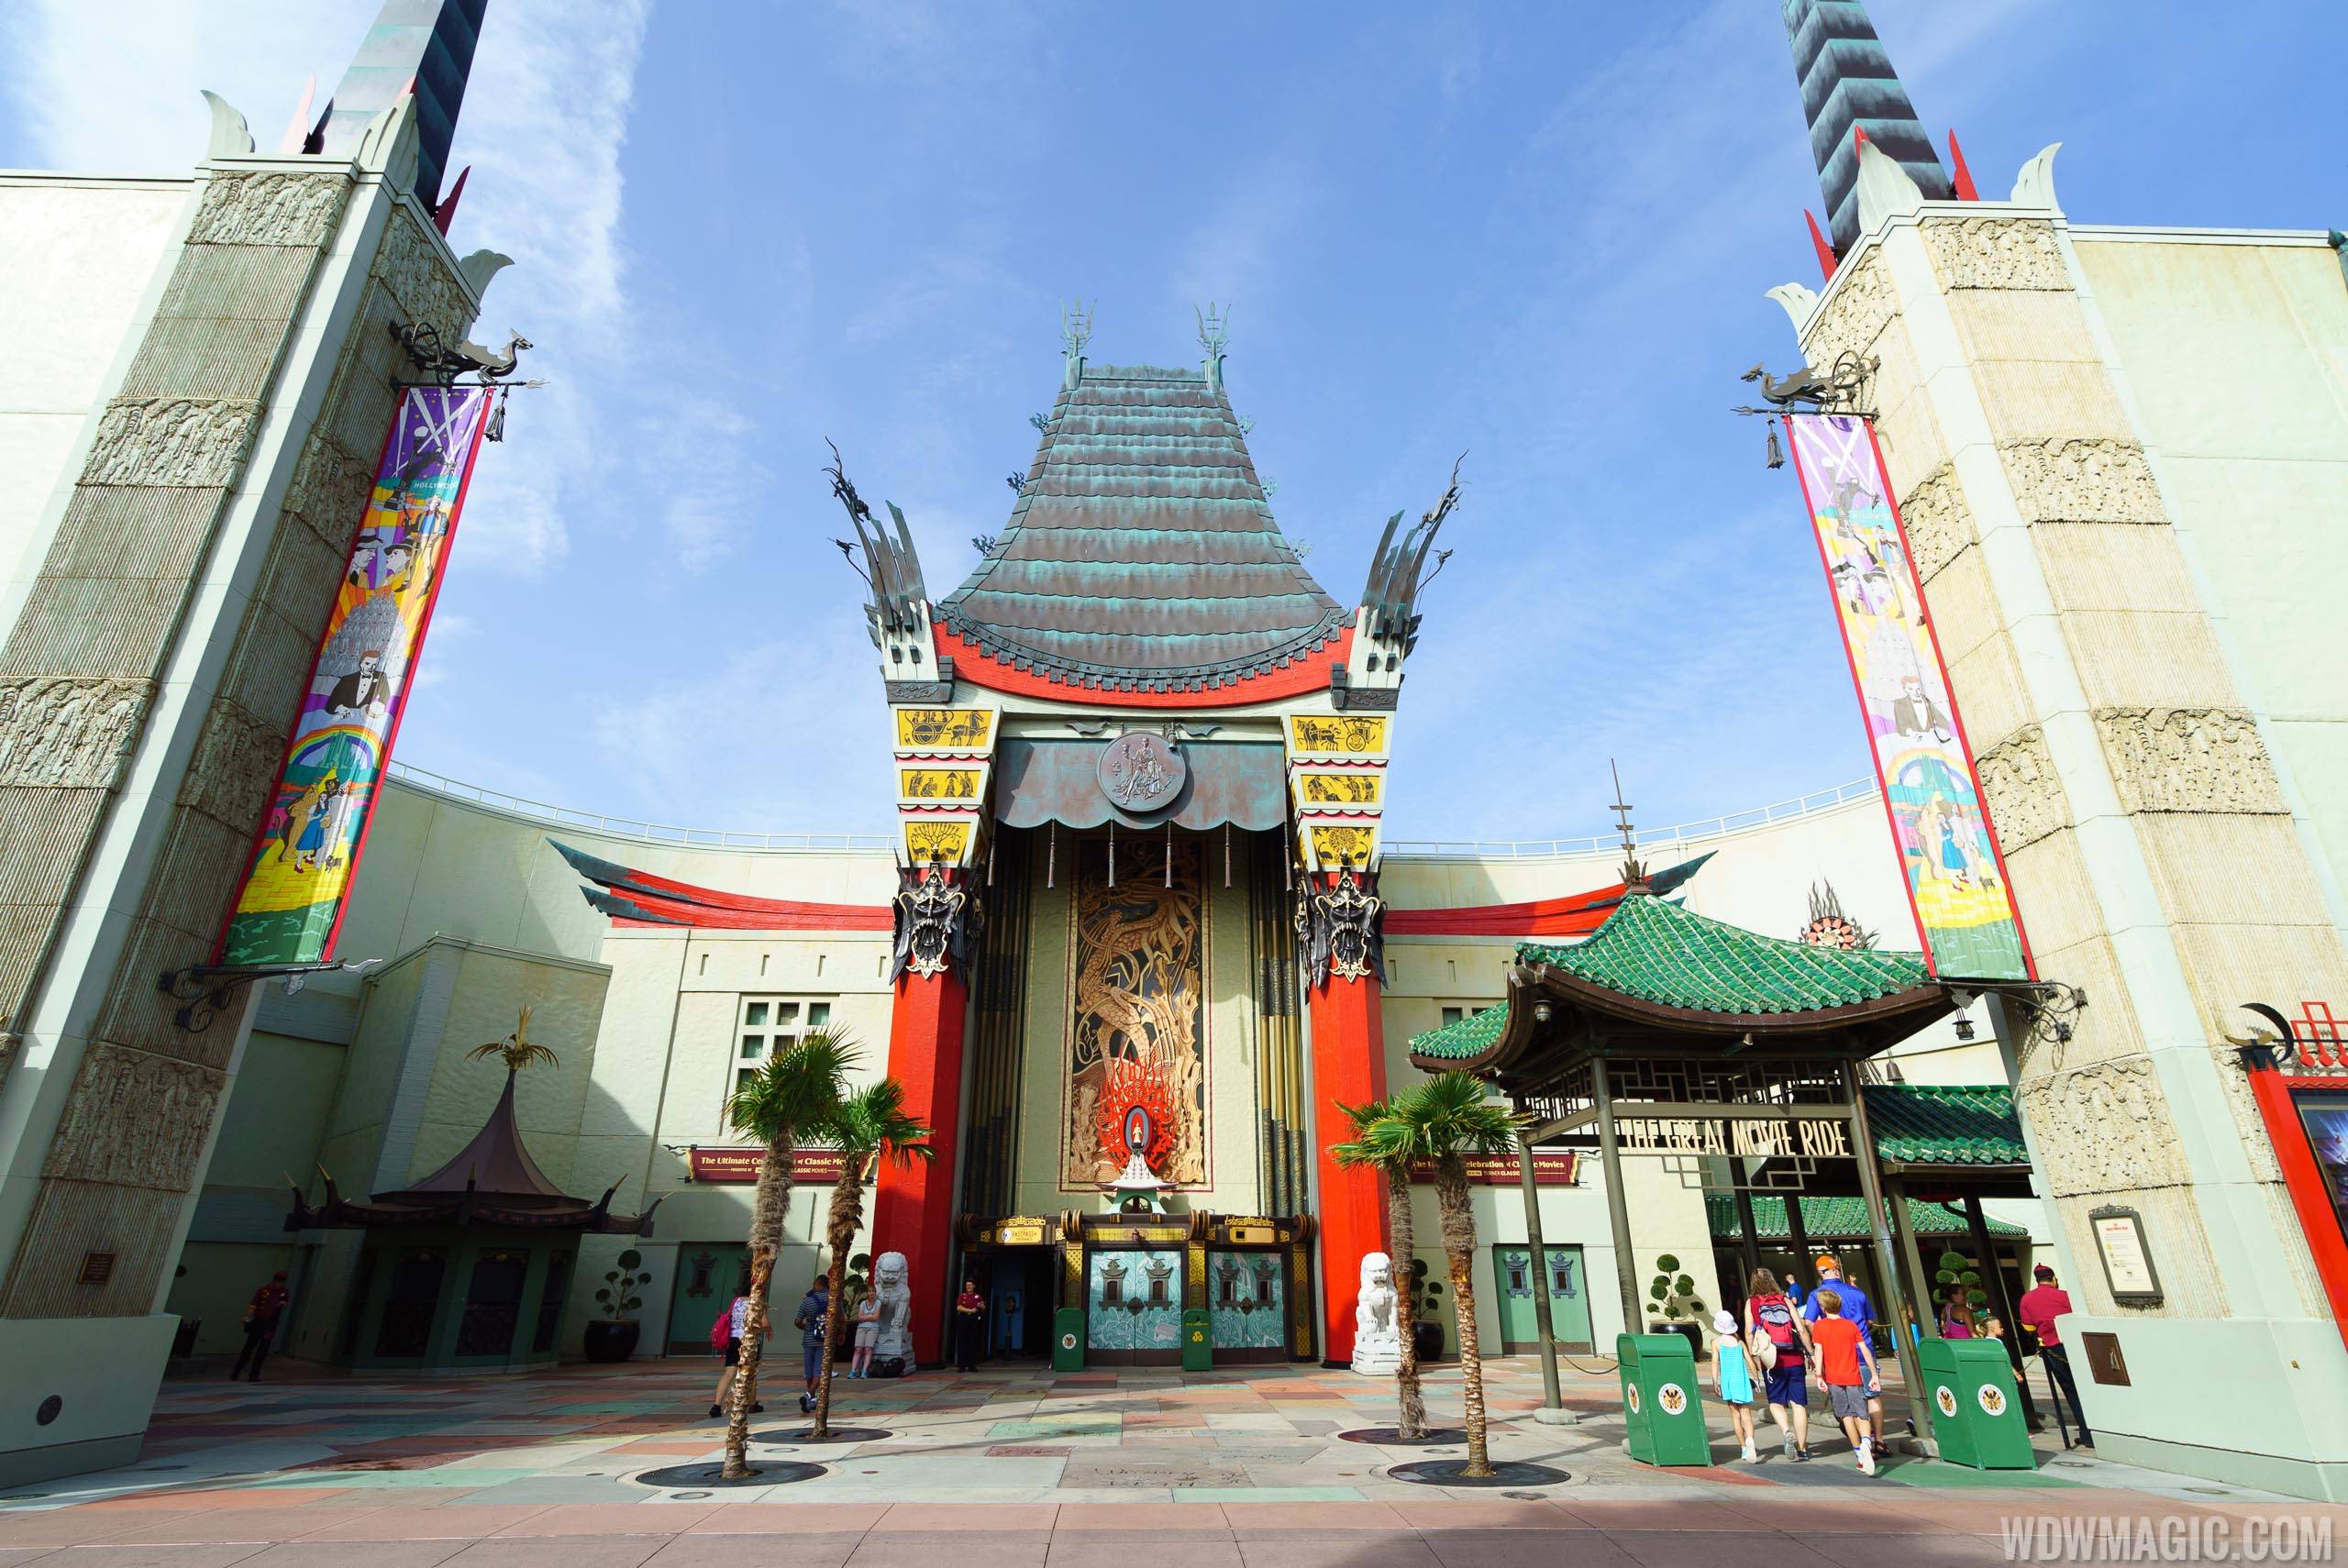 The Great Movie Ride - The Chinese Theatre exterior